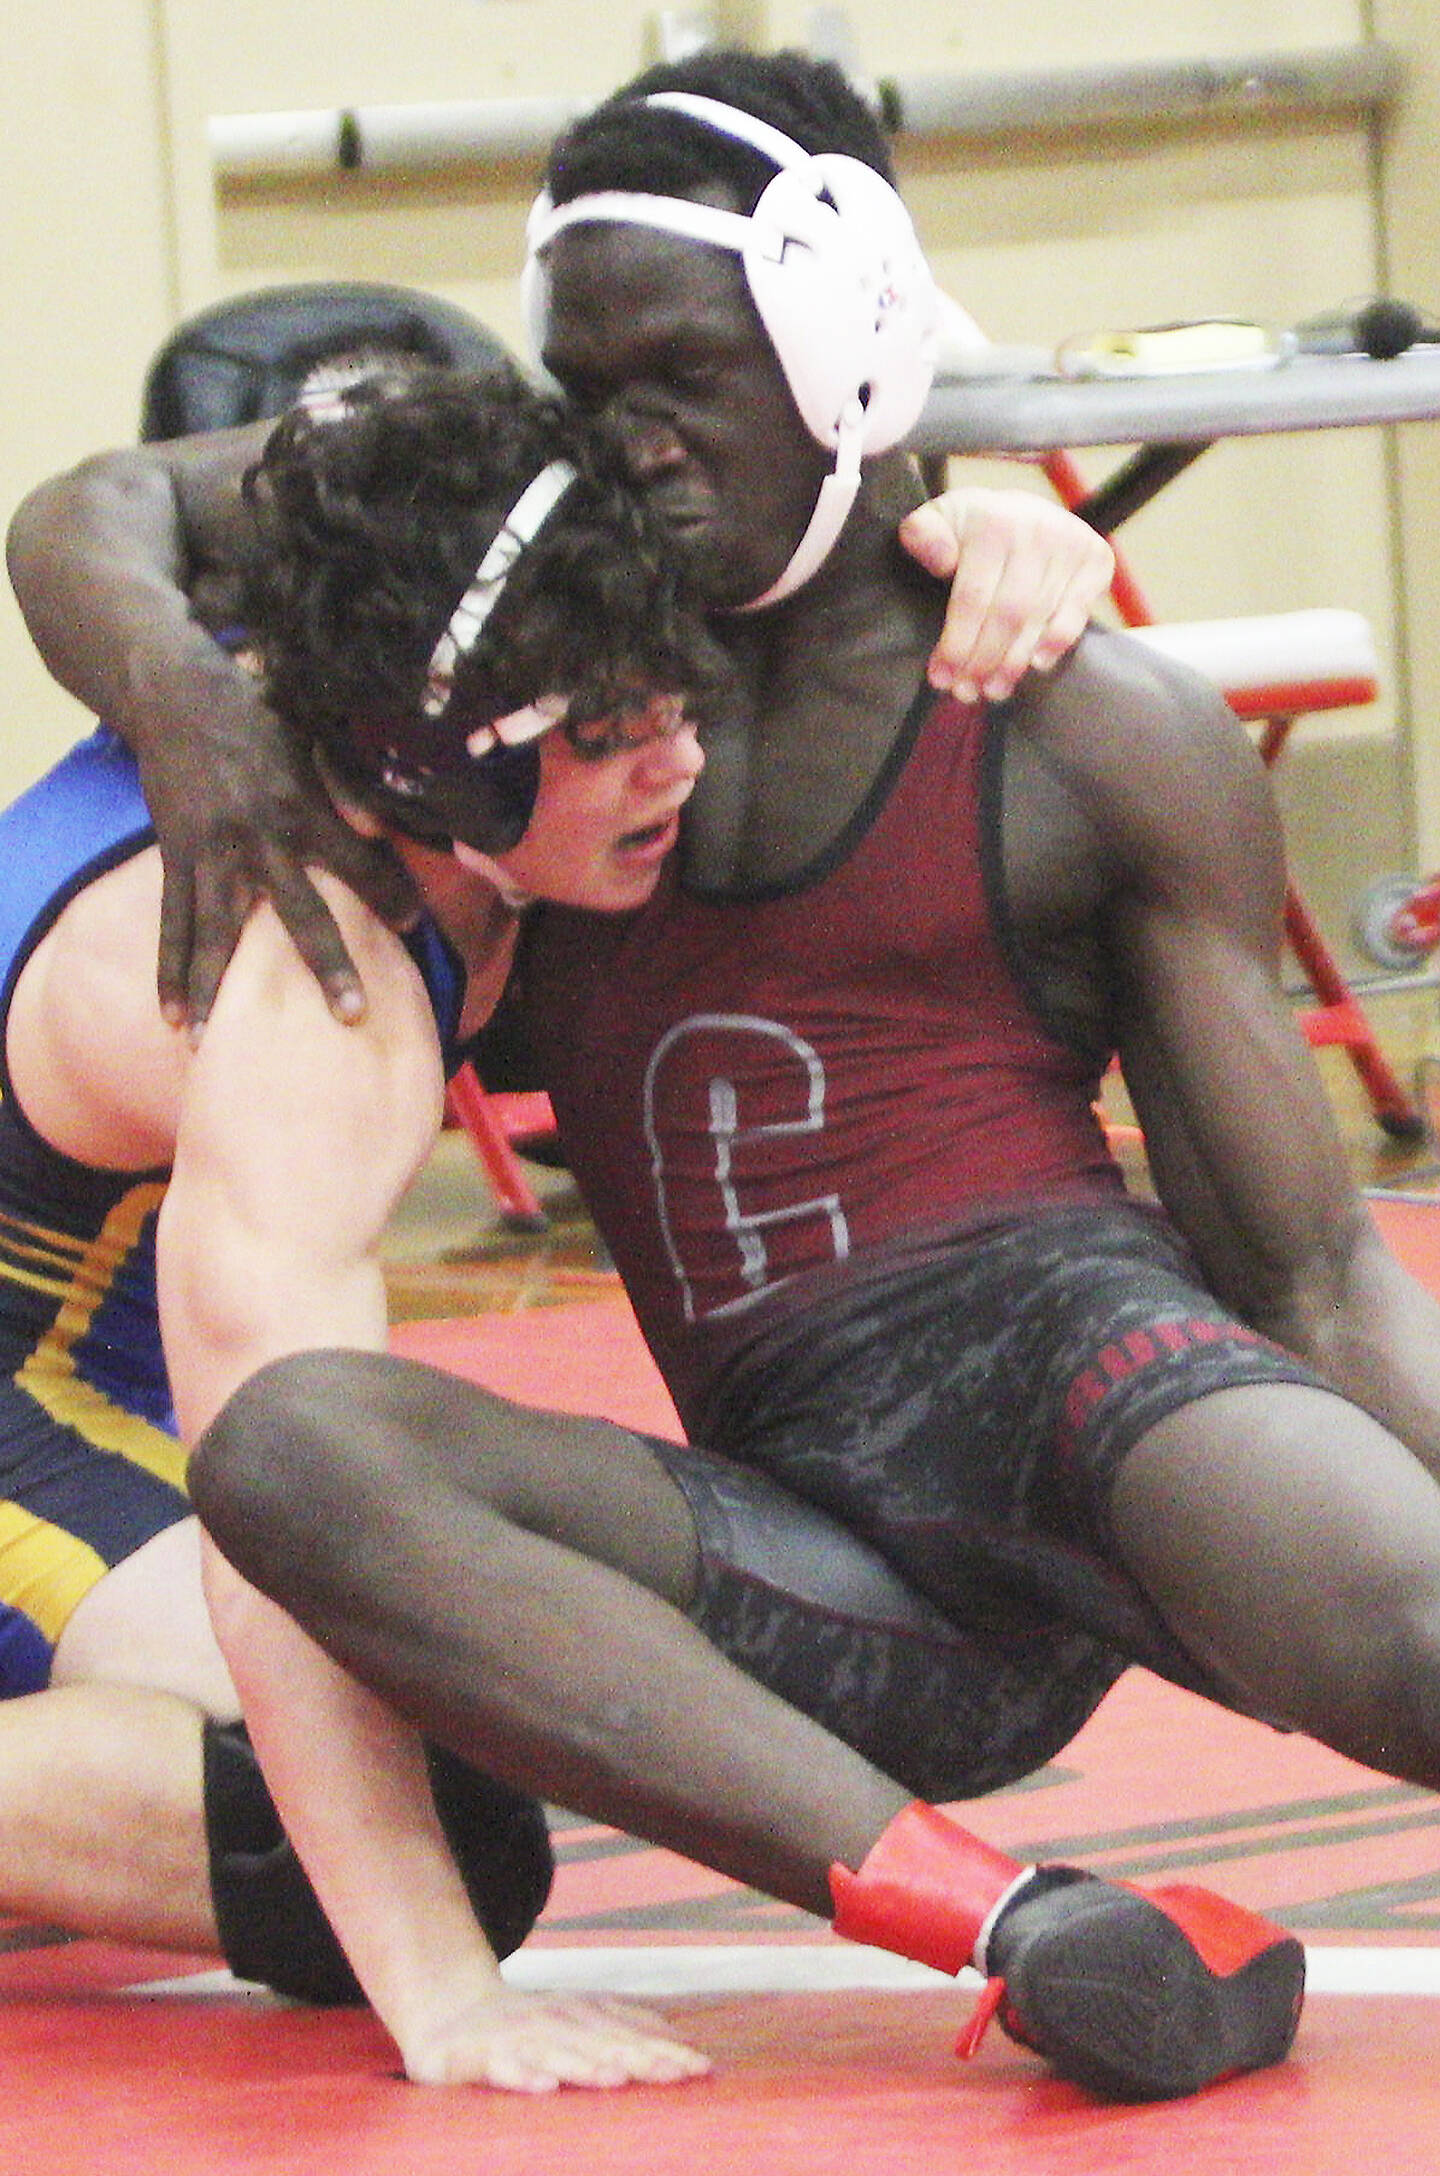 Much of Garrett Goade’s opening match was a stalemate as they were tied 0-0 with seconds left.